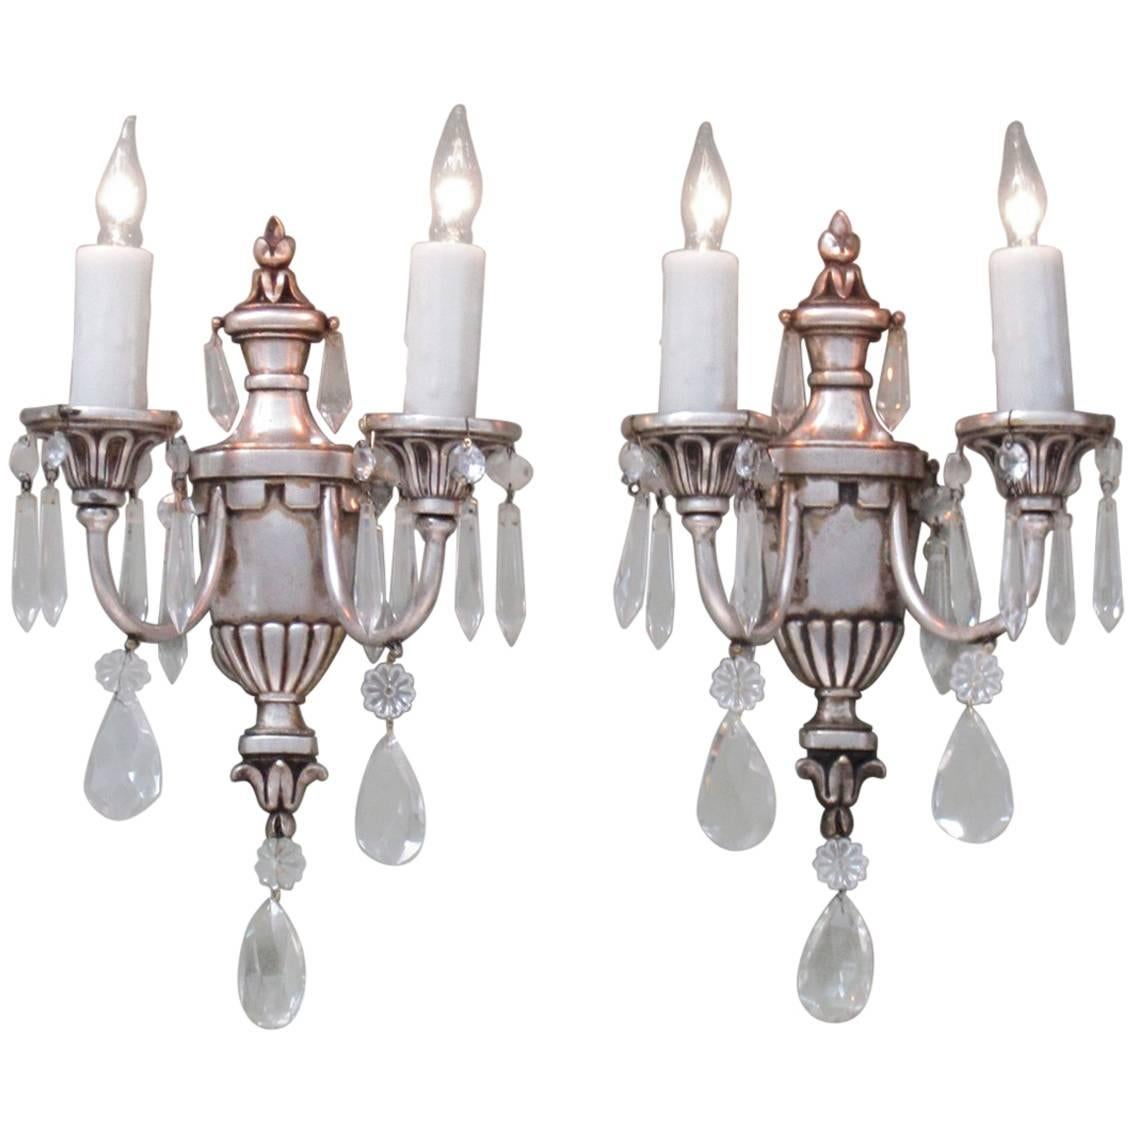 Early 20th Century Italian Neoclassical Silvered Bronze Urn and Crystal Sconces